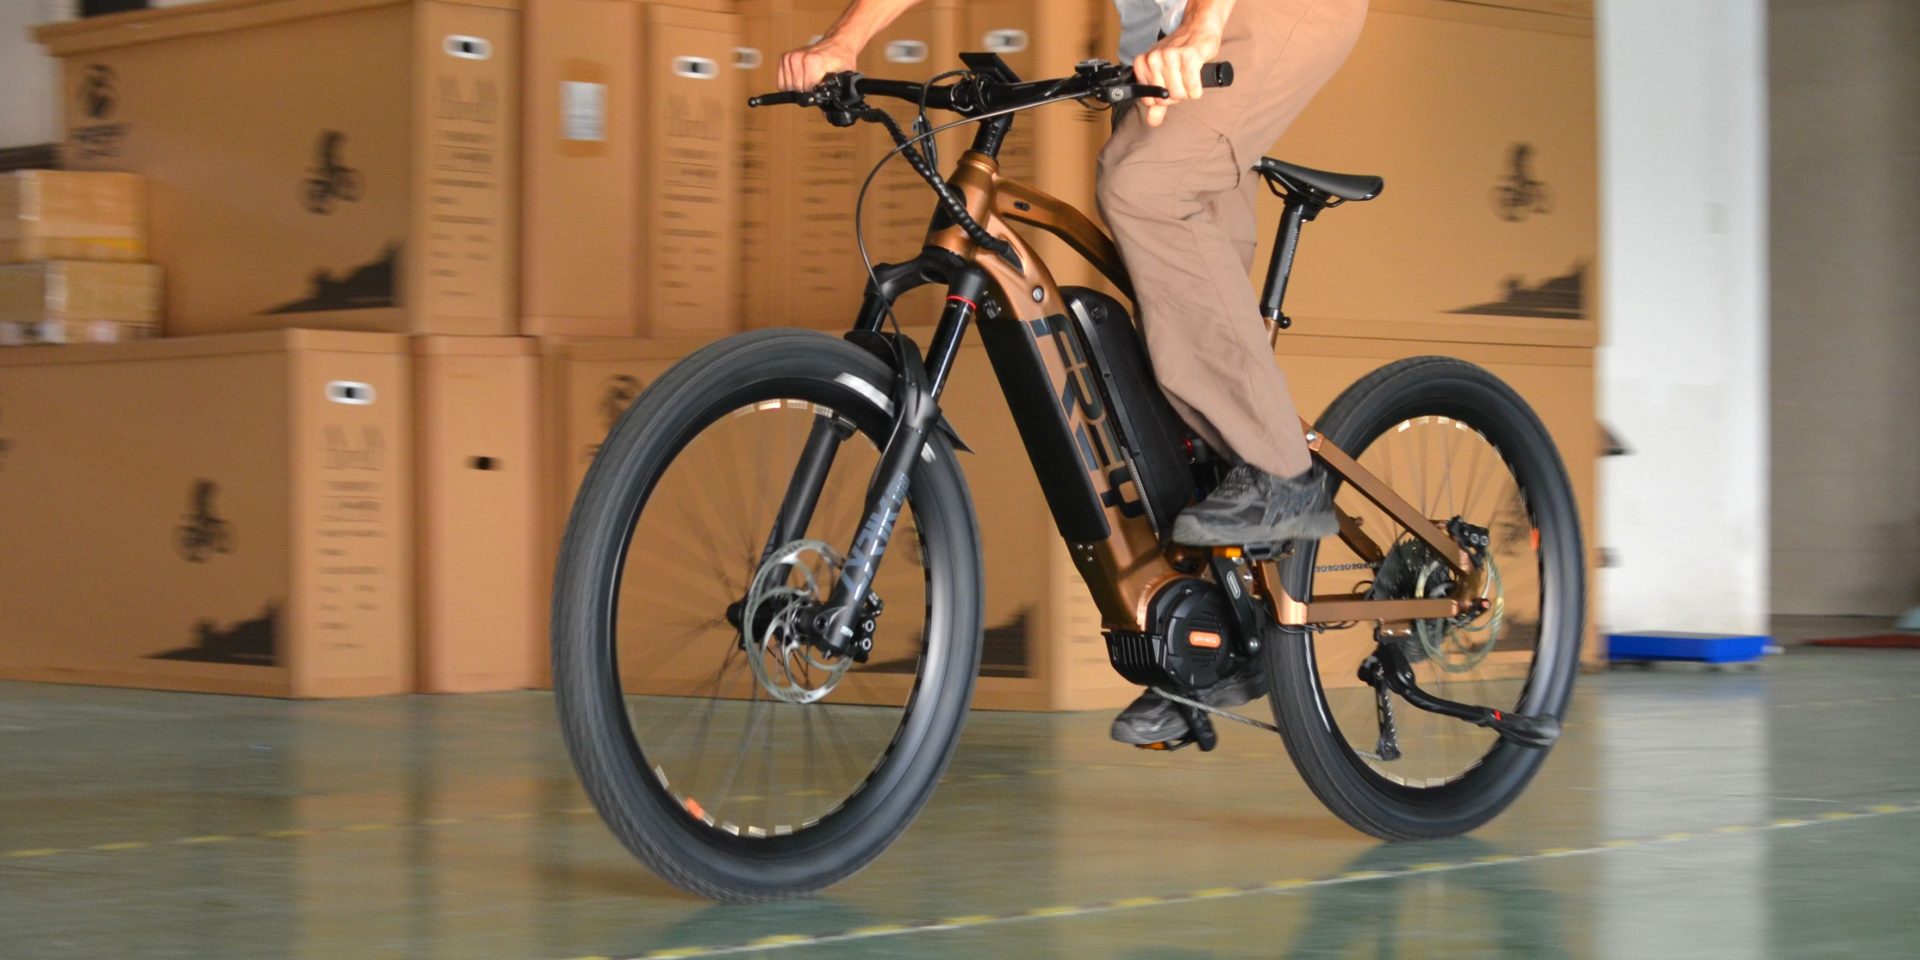 Frey Bike unveiled its two high-power and high-speed e-bikes